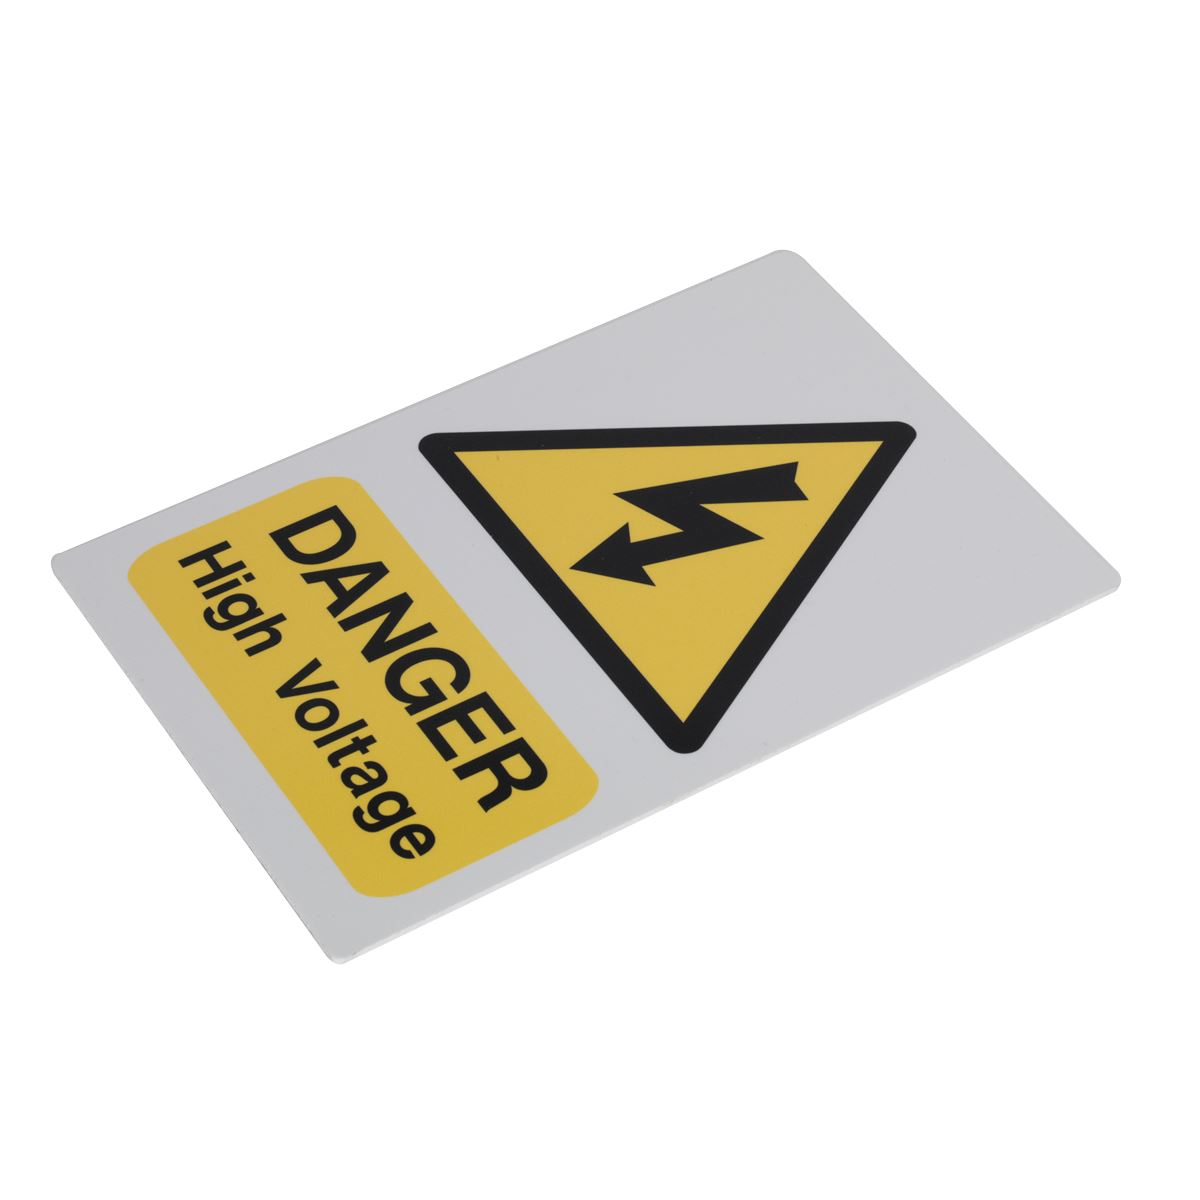 Sealey High Voltage Warning Sign 200 x 300mm